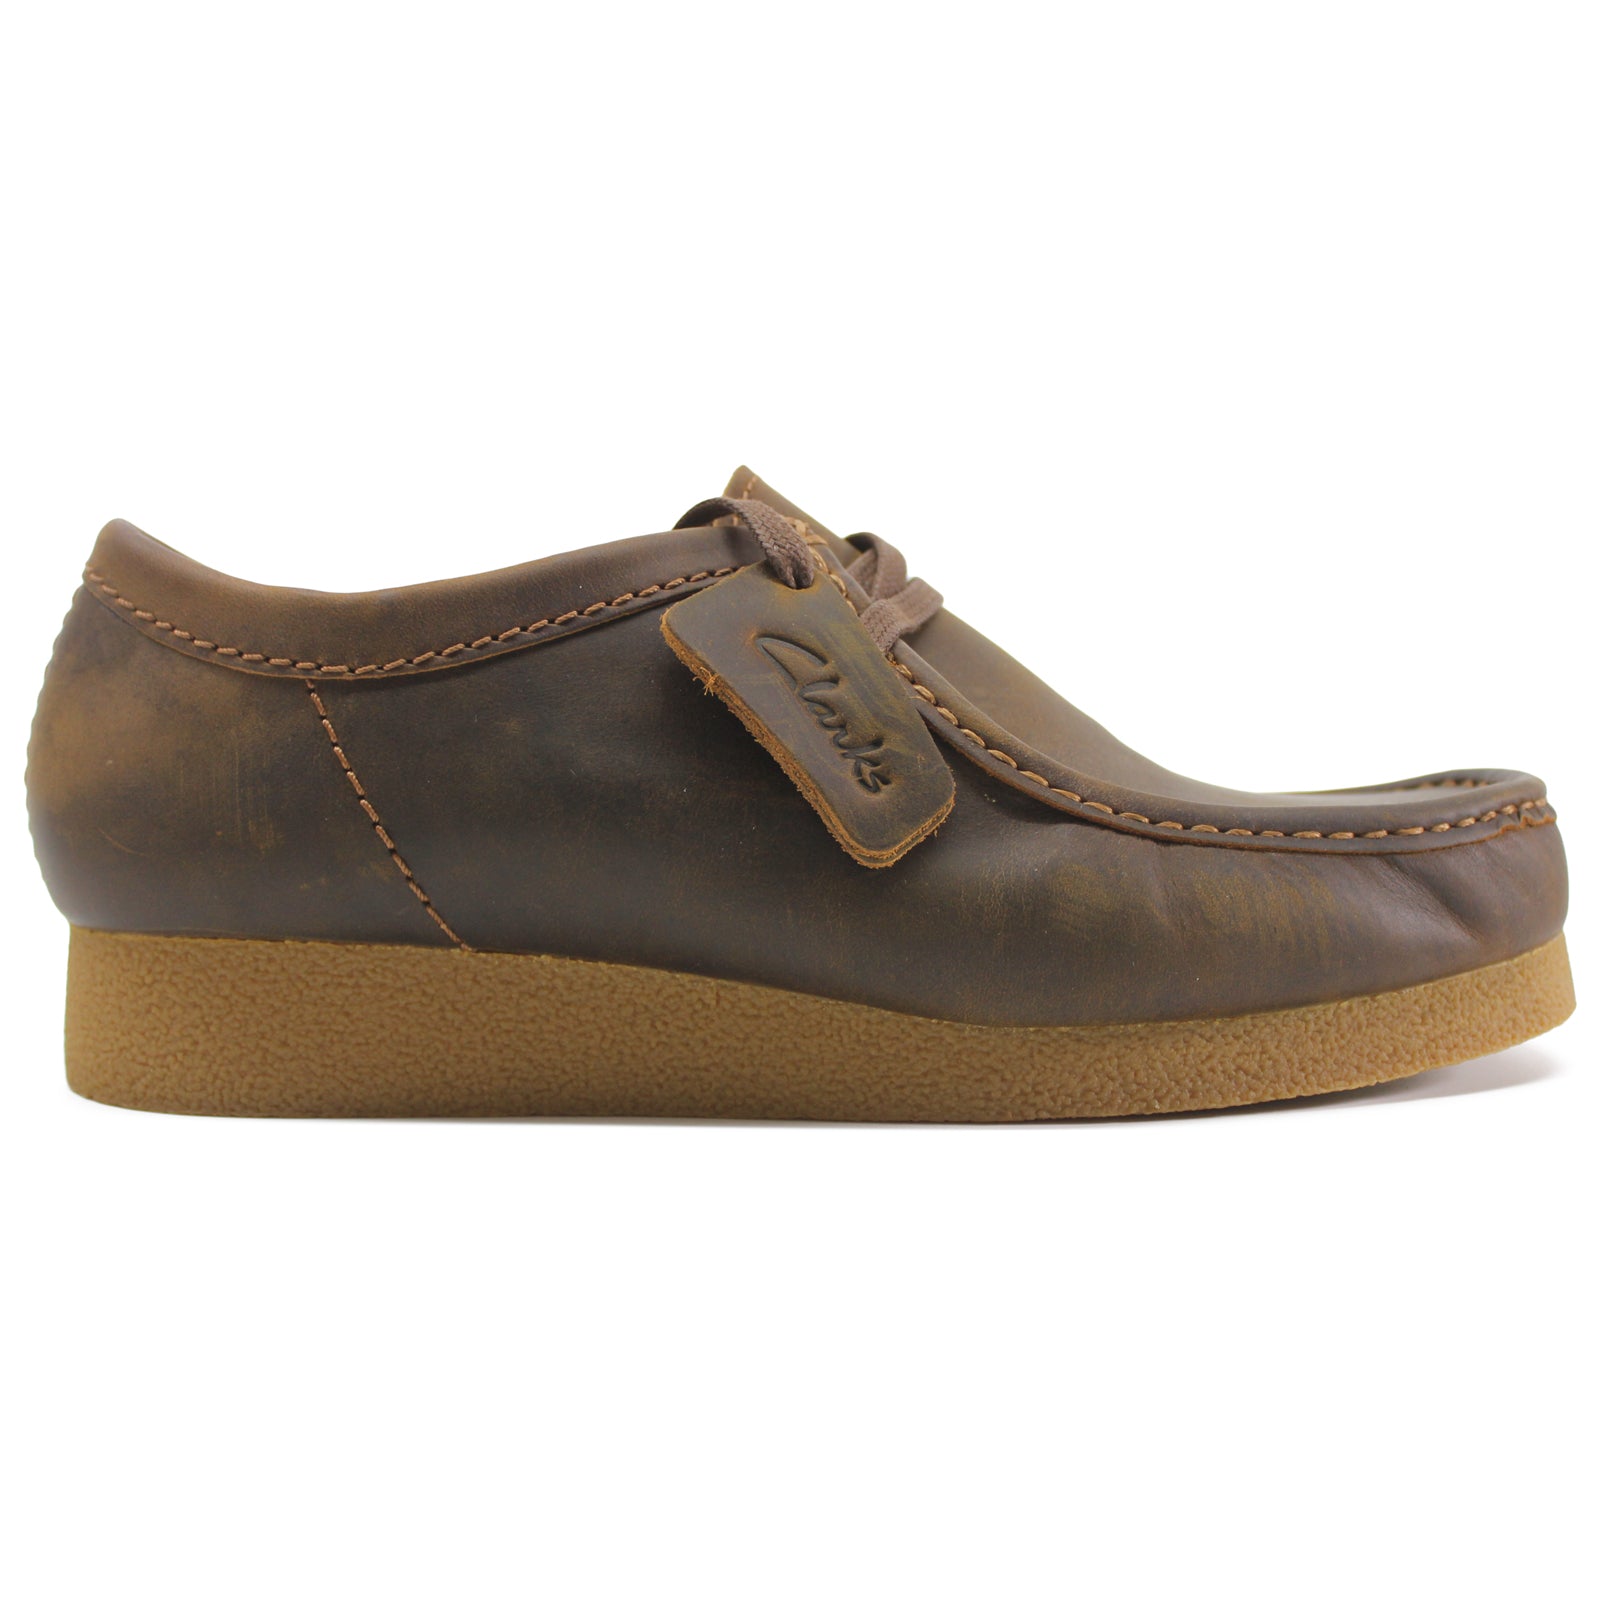 Clarks Originals Wallabee Waxy Leather Mens Shoes